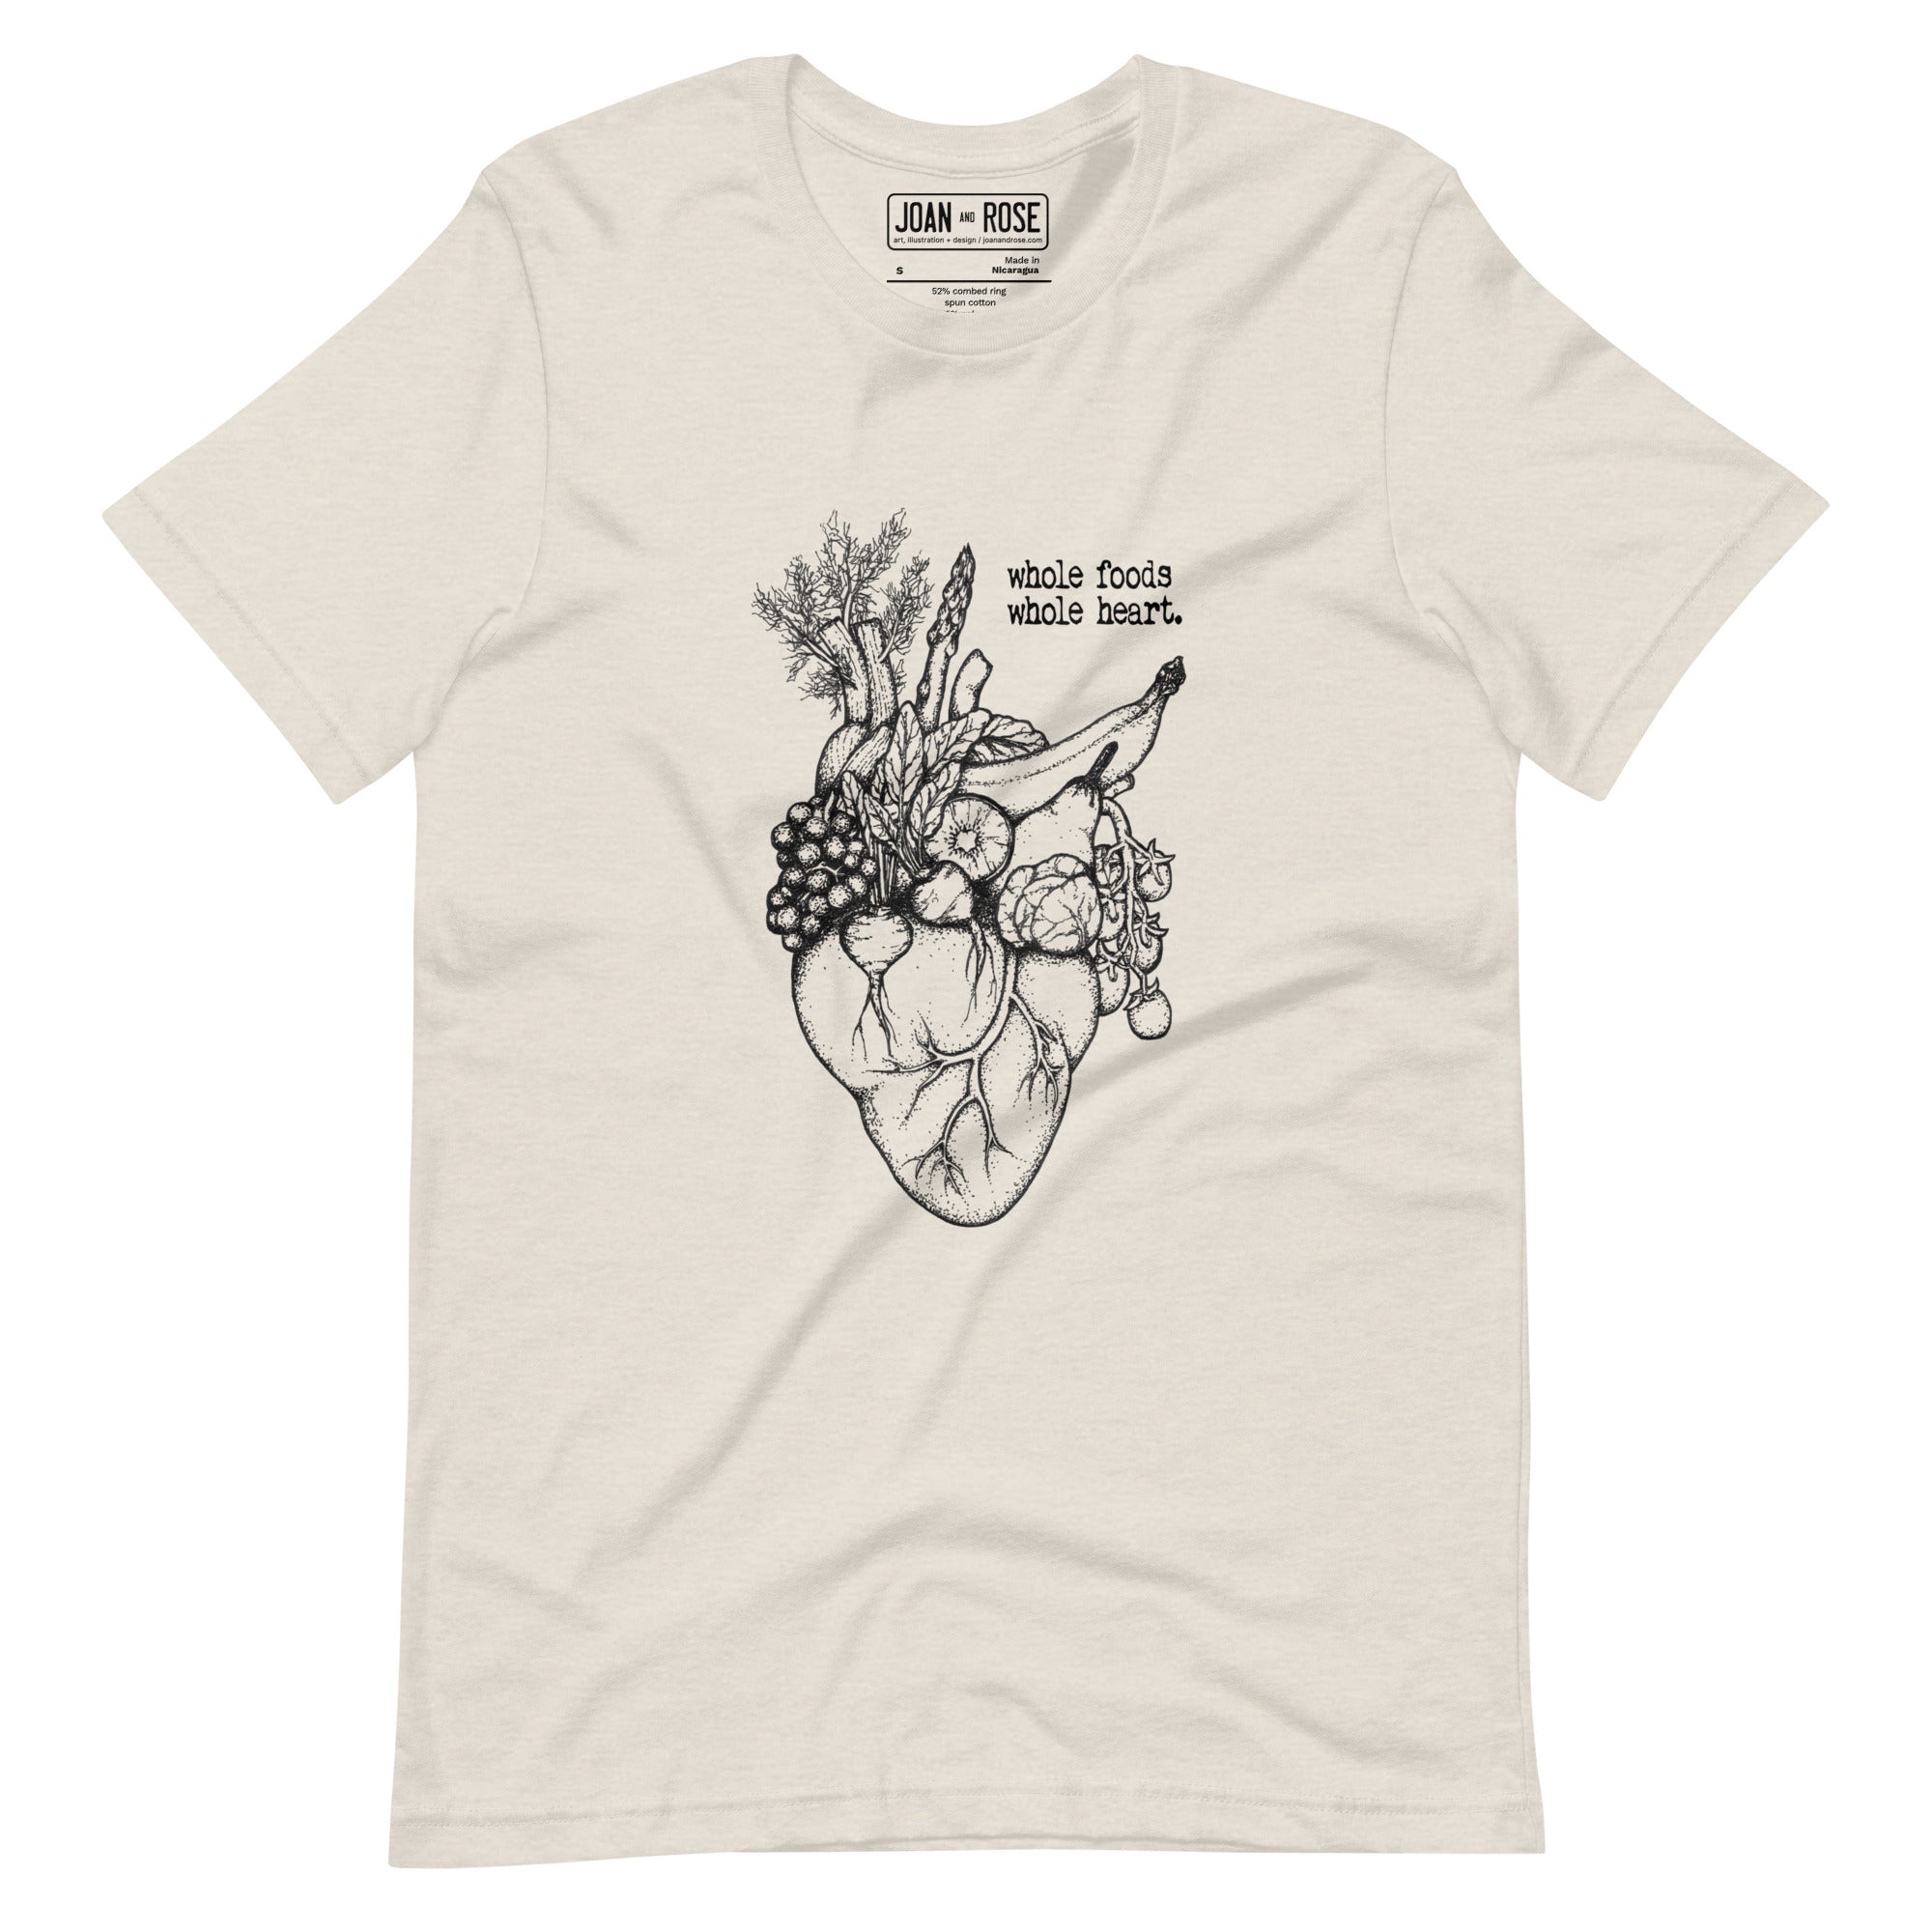 Heather dust version of Whole foods, Whole heart t-shirt